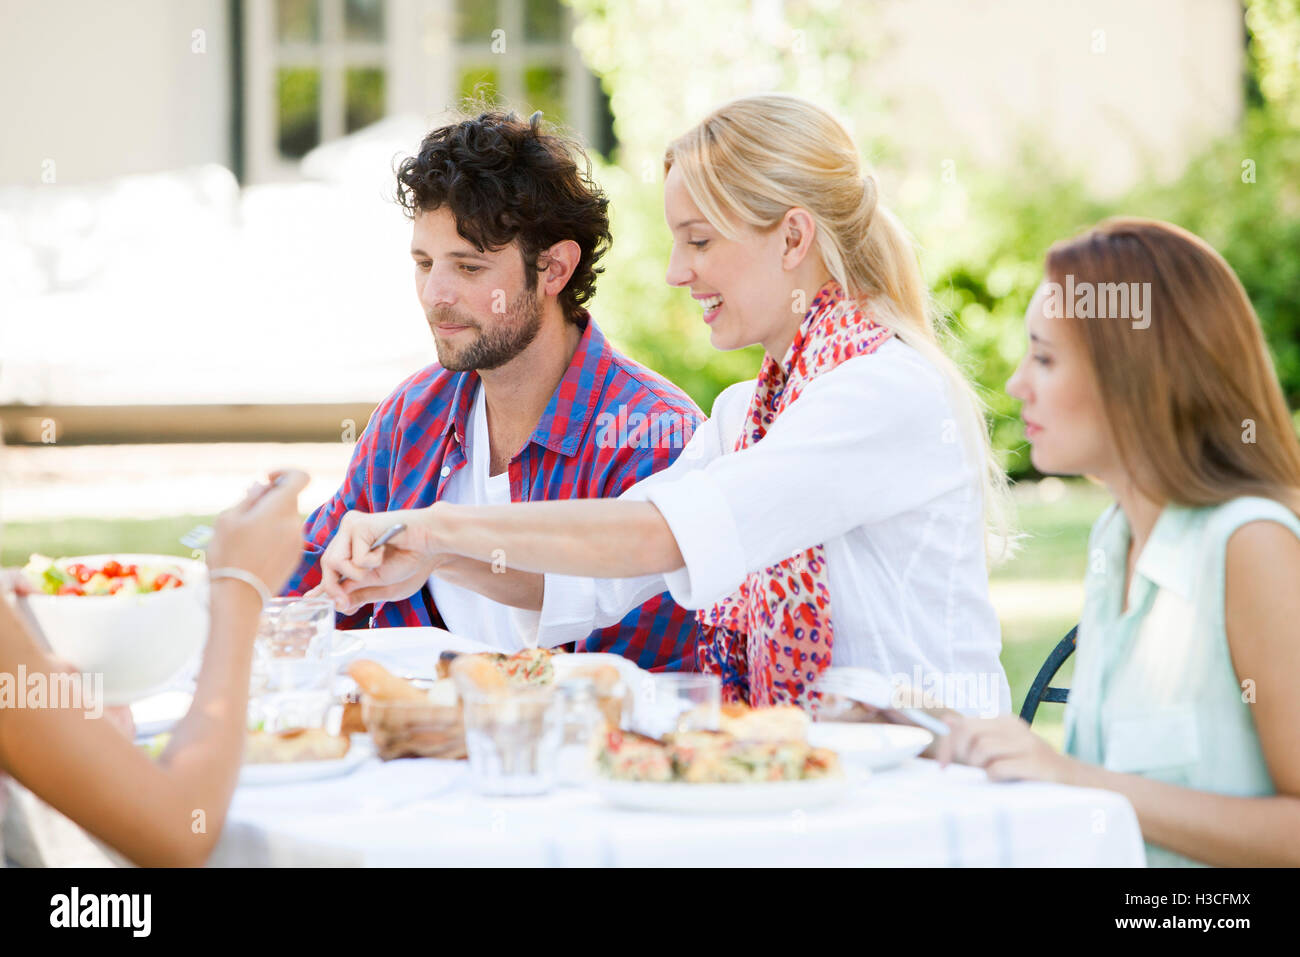 Friends having meal together outdoors Stock Photo